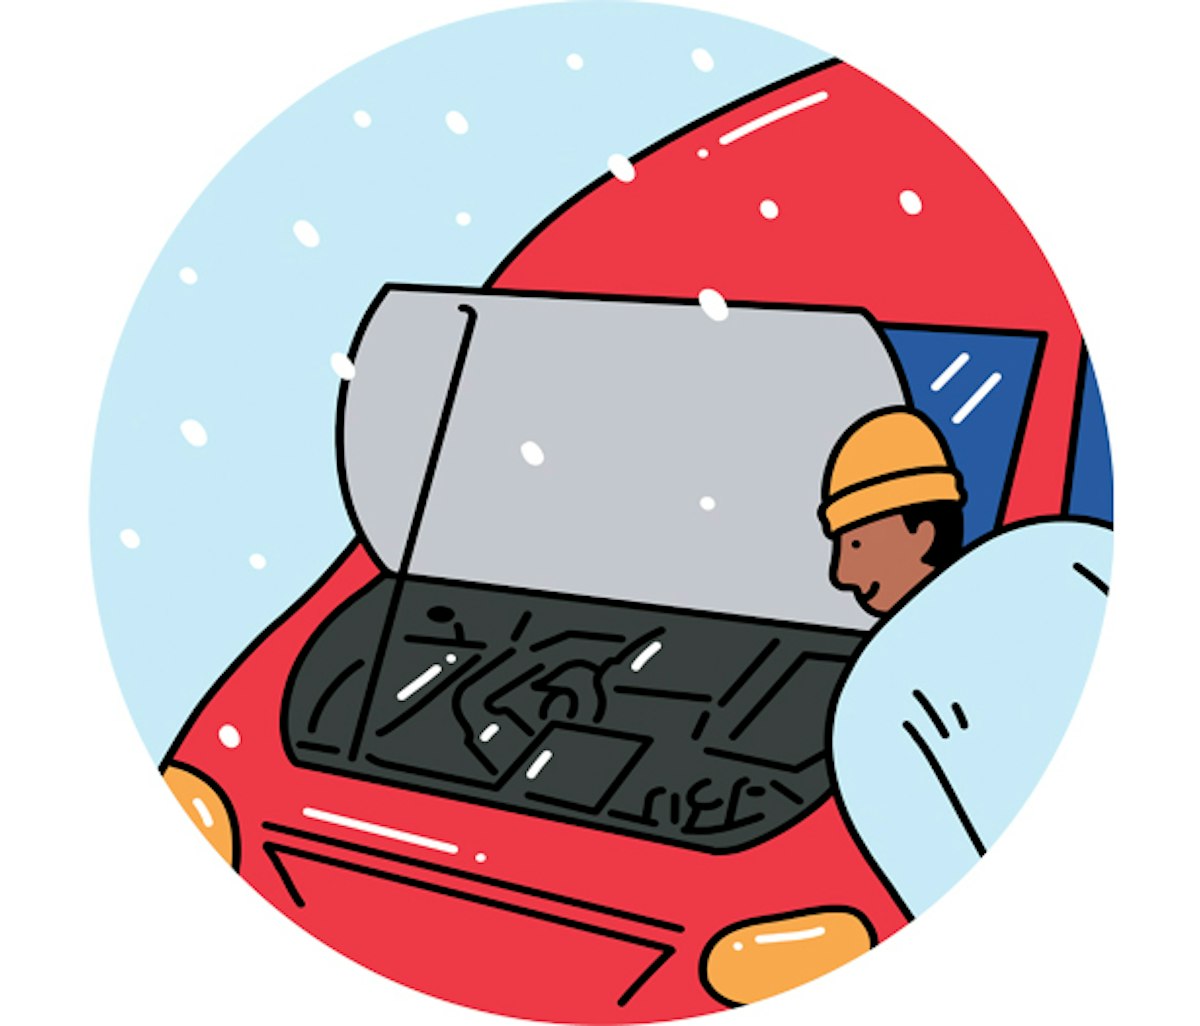 An illustration of a man working on a car in the snow.